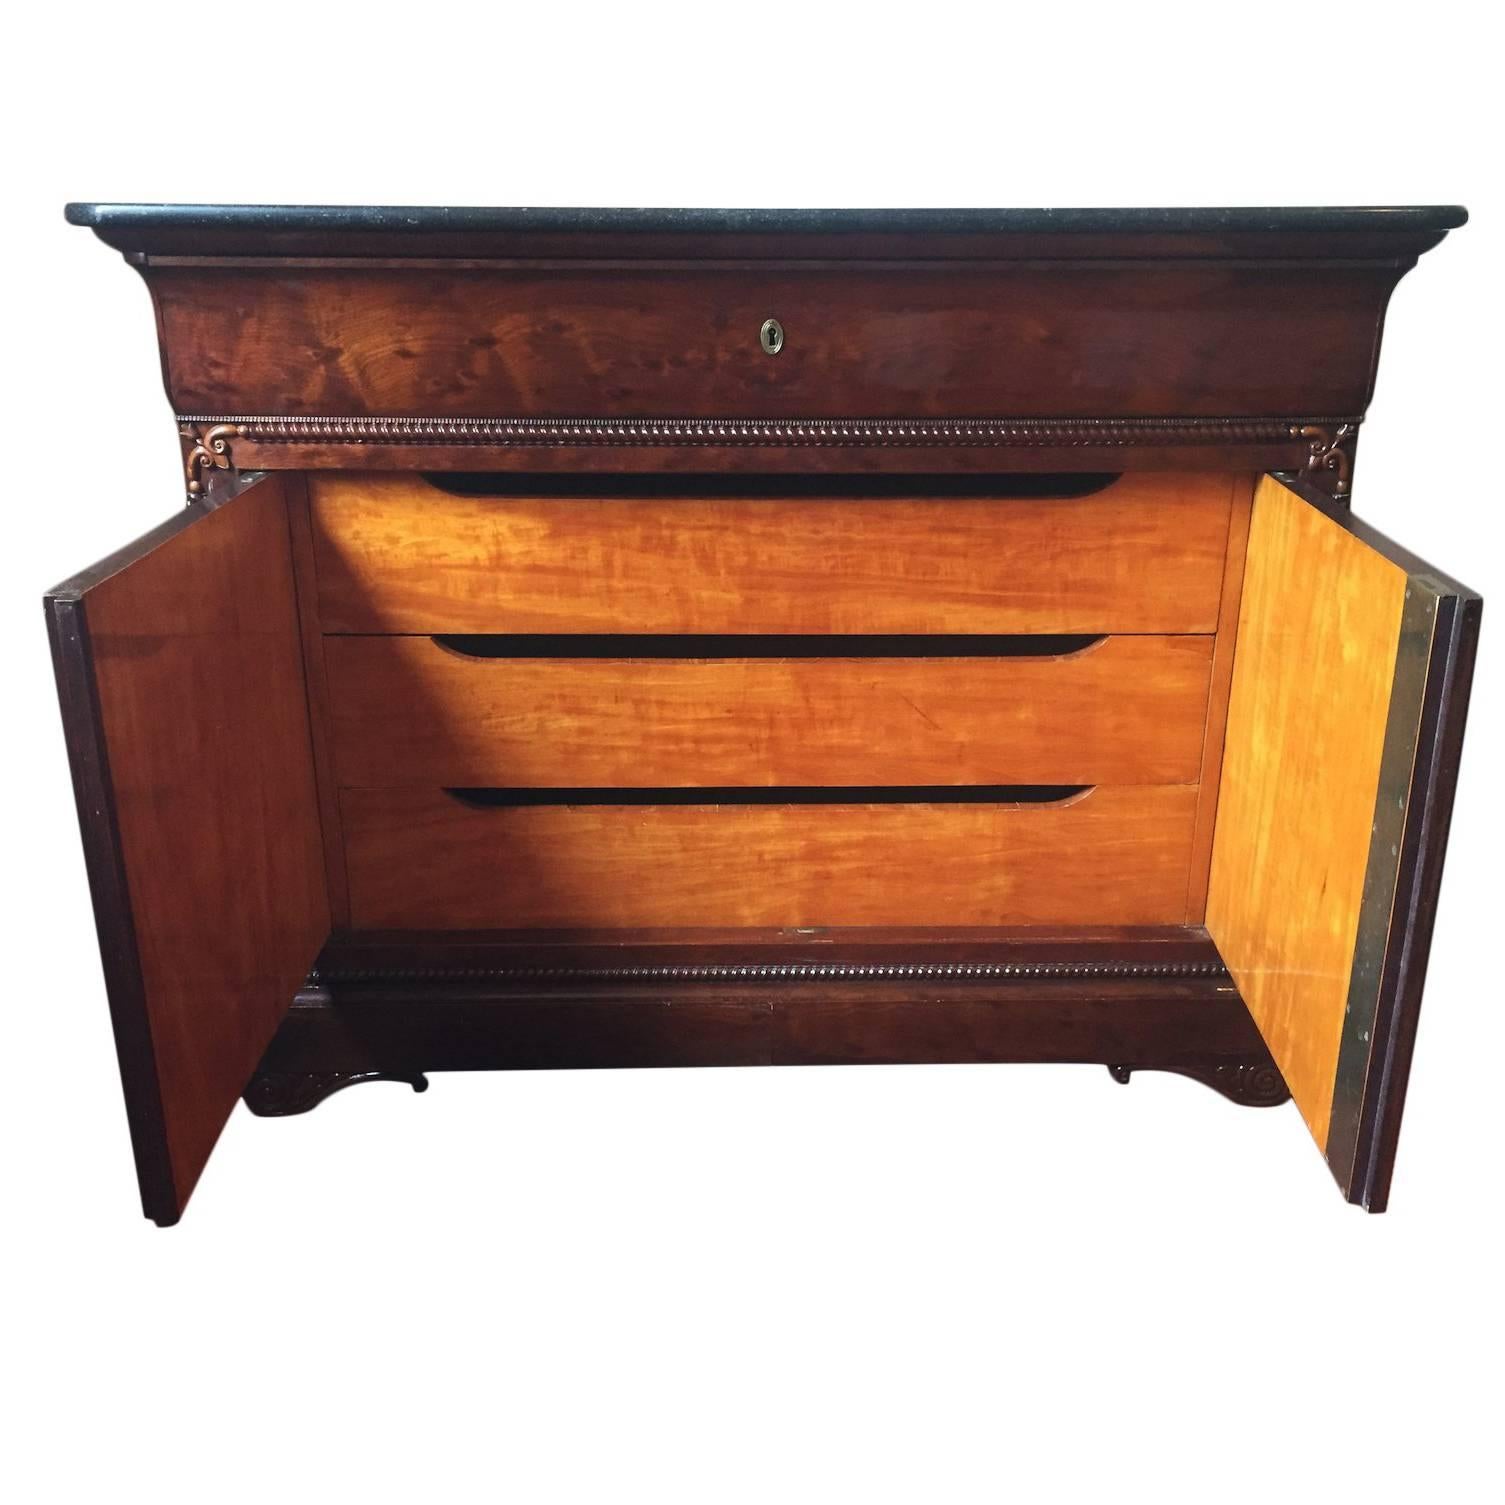 Splendid bird's-eye mahogany wood garniture on the front, the marble top is in very good condition.
The topmost drawer folding down into a secretary writing desk with compartment for storage and organization.
Elegant maple interior drawers.
      